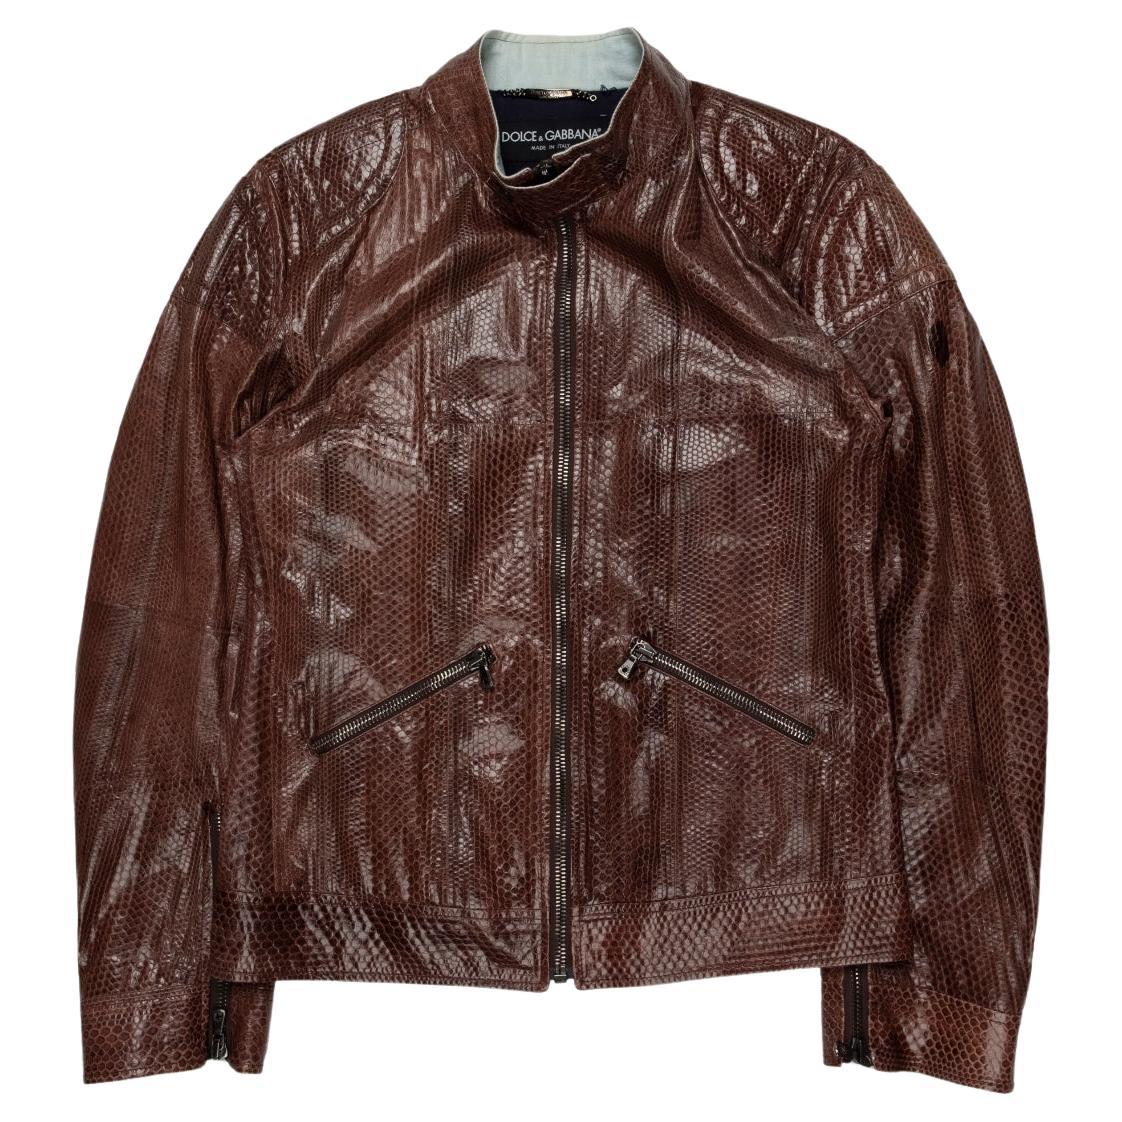 Dolce & Gabbana AW2005 Real Python Leather Jacket For Sale